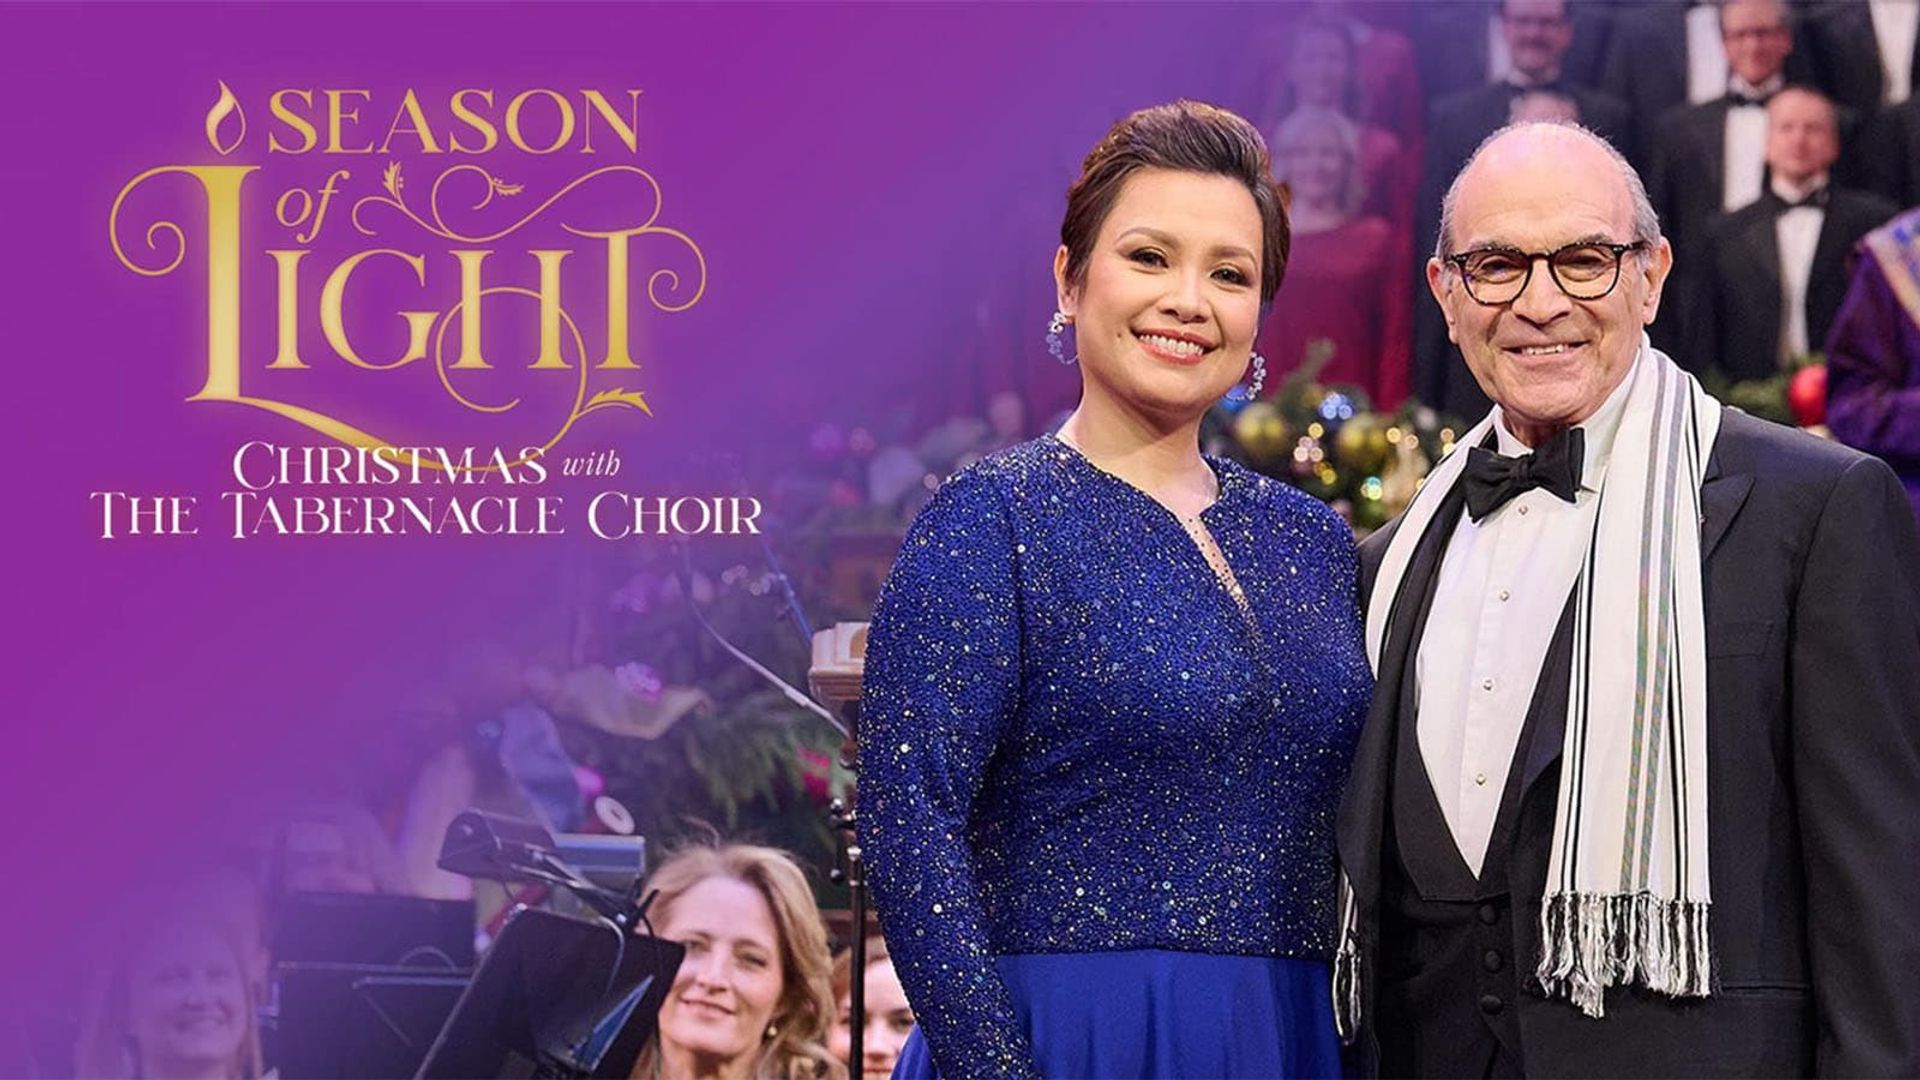 Season of Light: Christmas with the Tabernacle Choir background